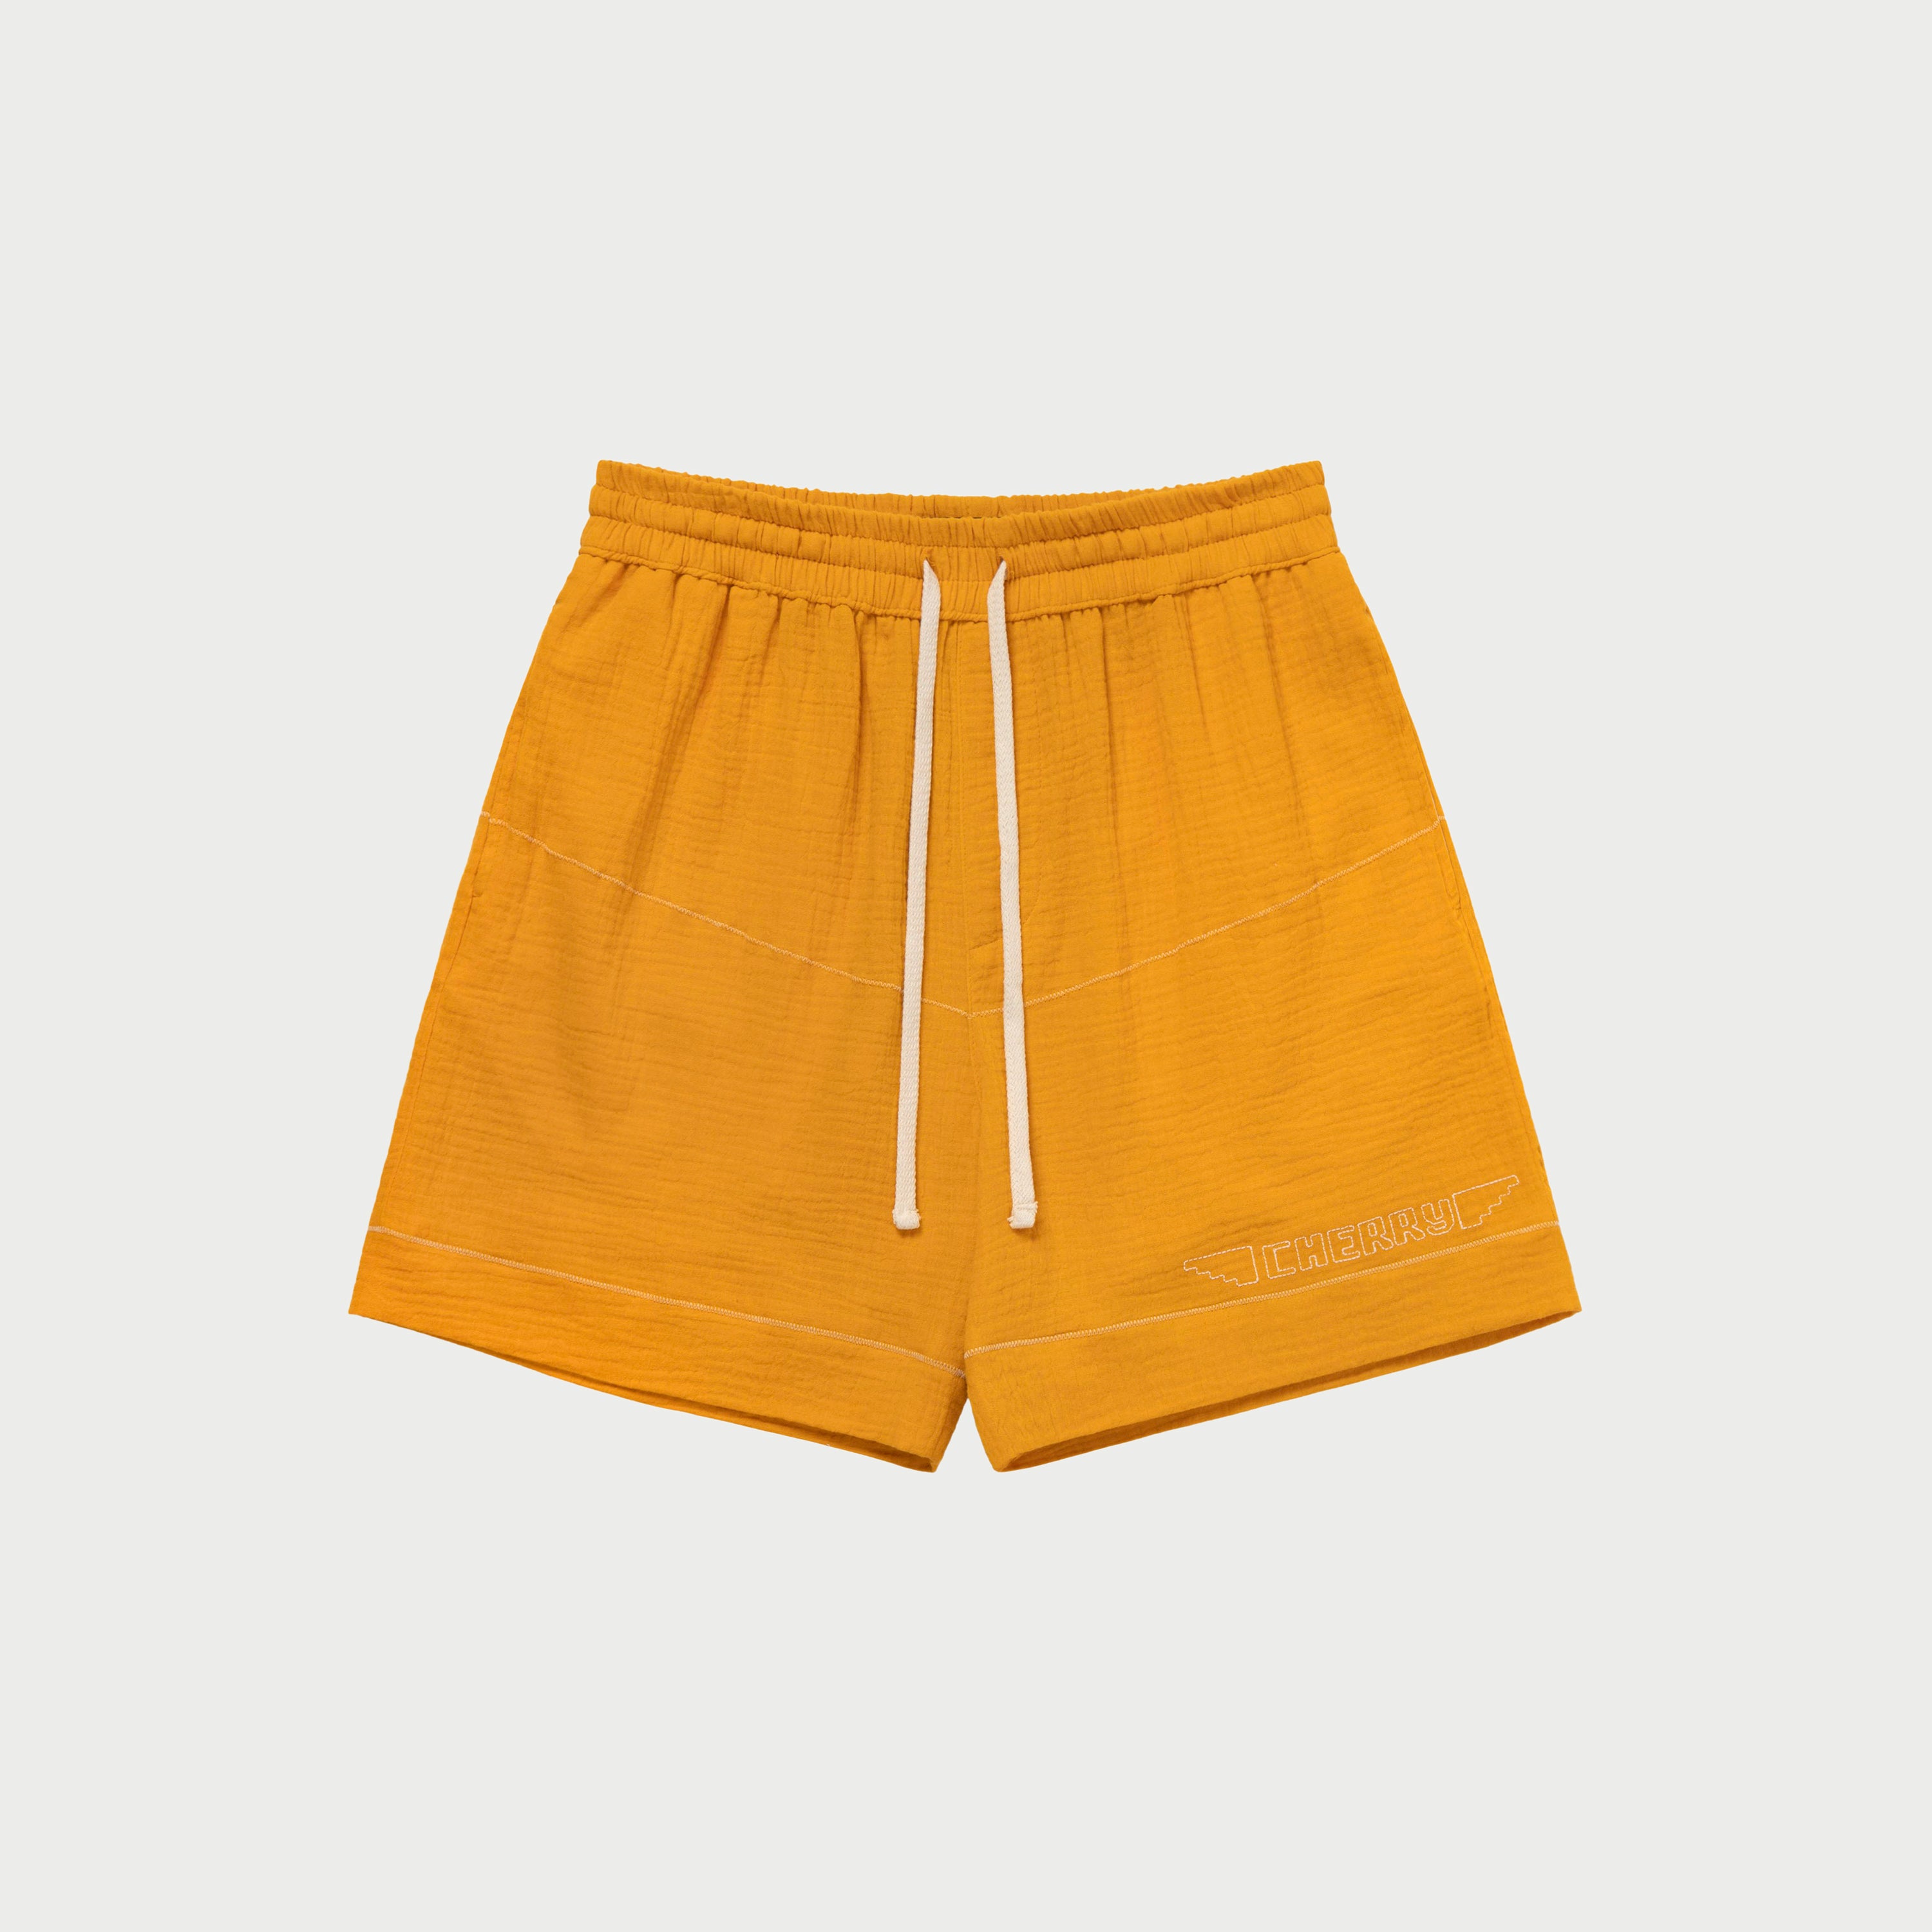 Embroidered Vacation Shorts (Gold)